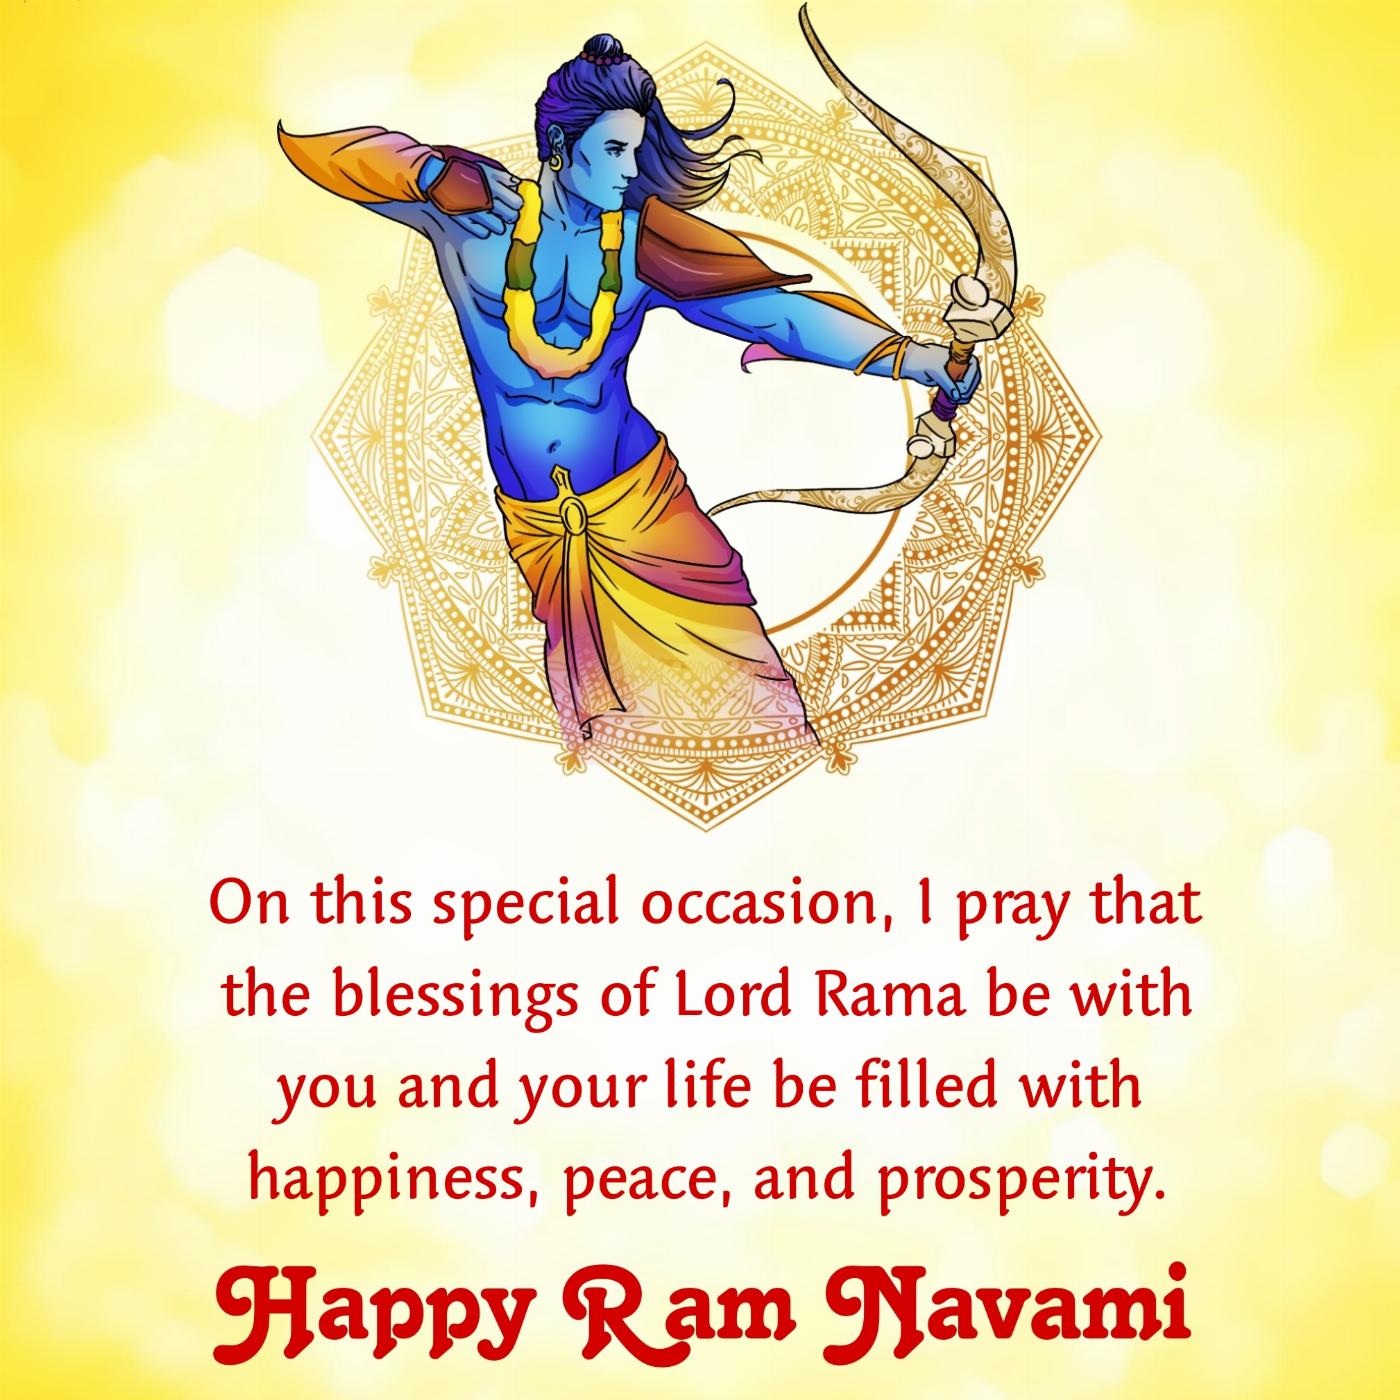 On this special occasion I pray that the blessings of Lord Rama